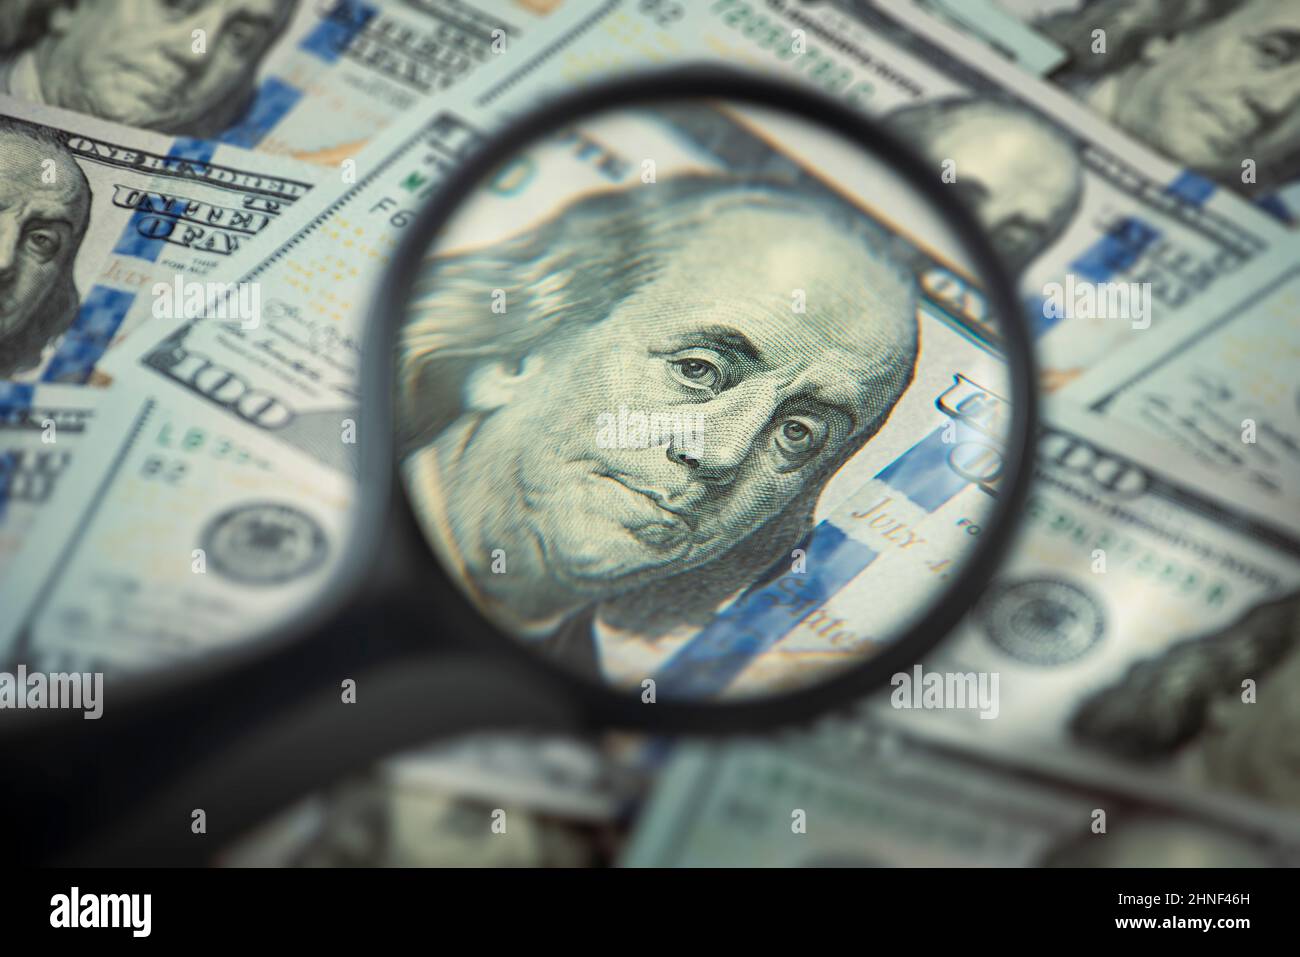 Finance and capital banking concept, Portrait of Benjamin Franklin in a magnifying glass, One hundred dollar bills Stock Photo